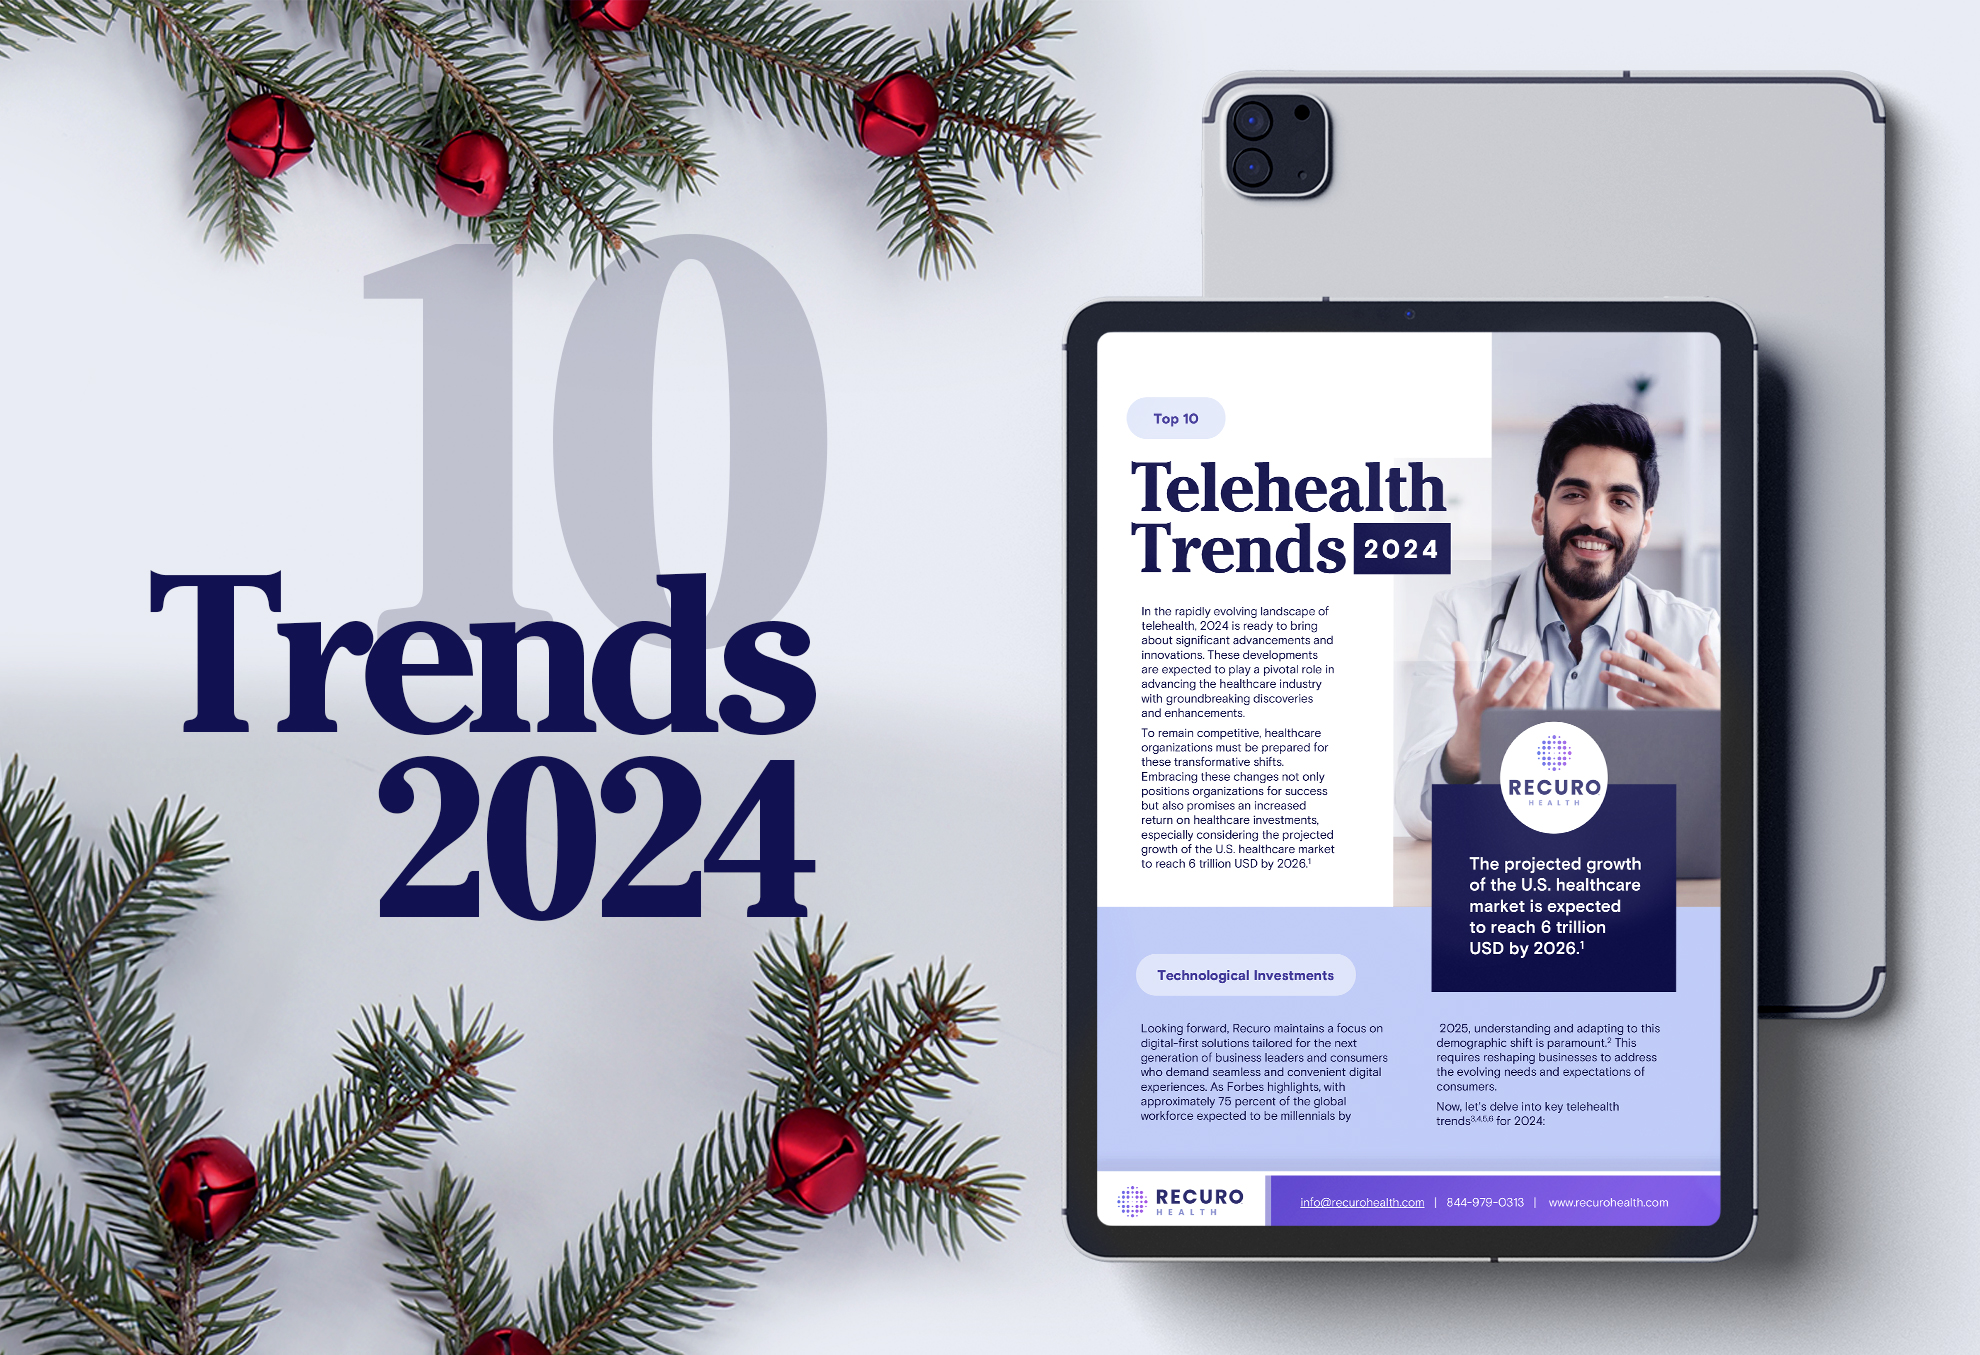 Top 10 Telehealth Trends for 2024